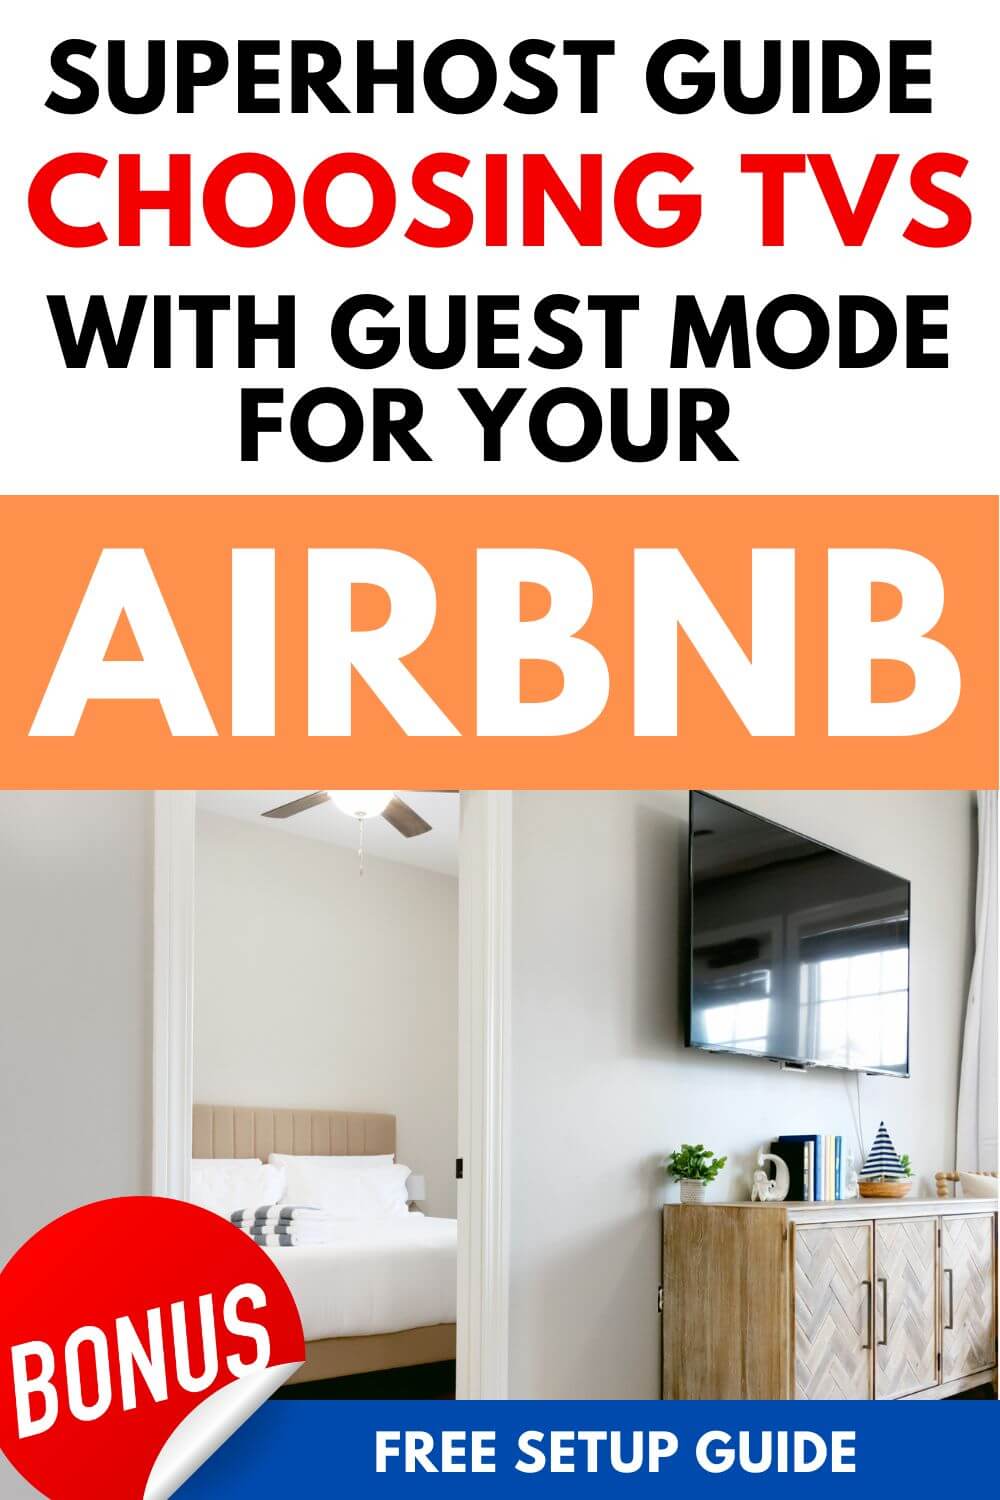 Best TV for AIrbnb Rentals